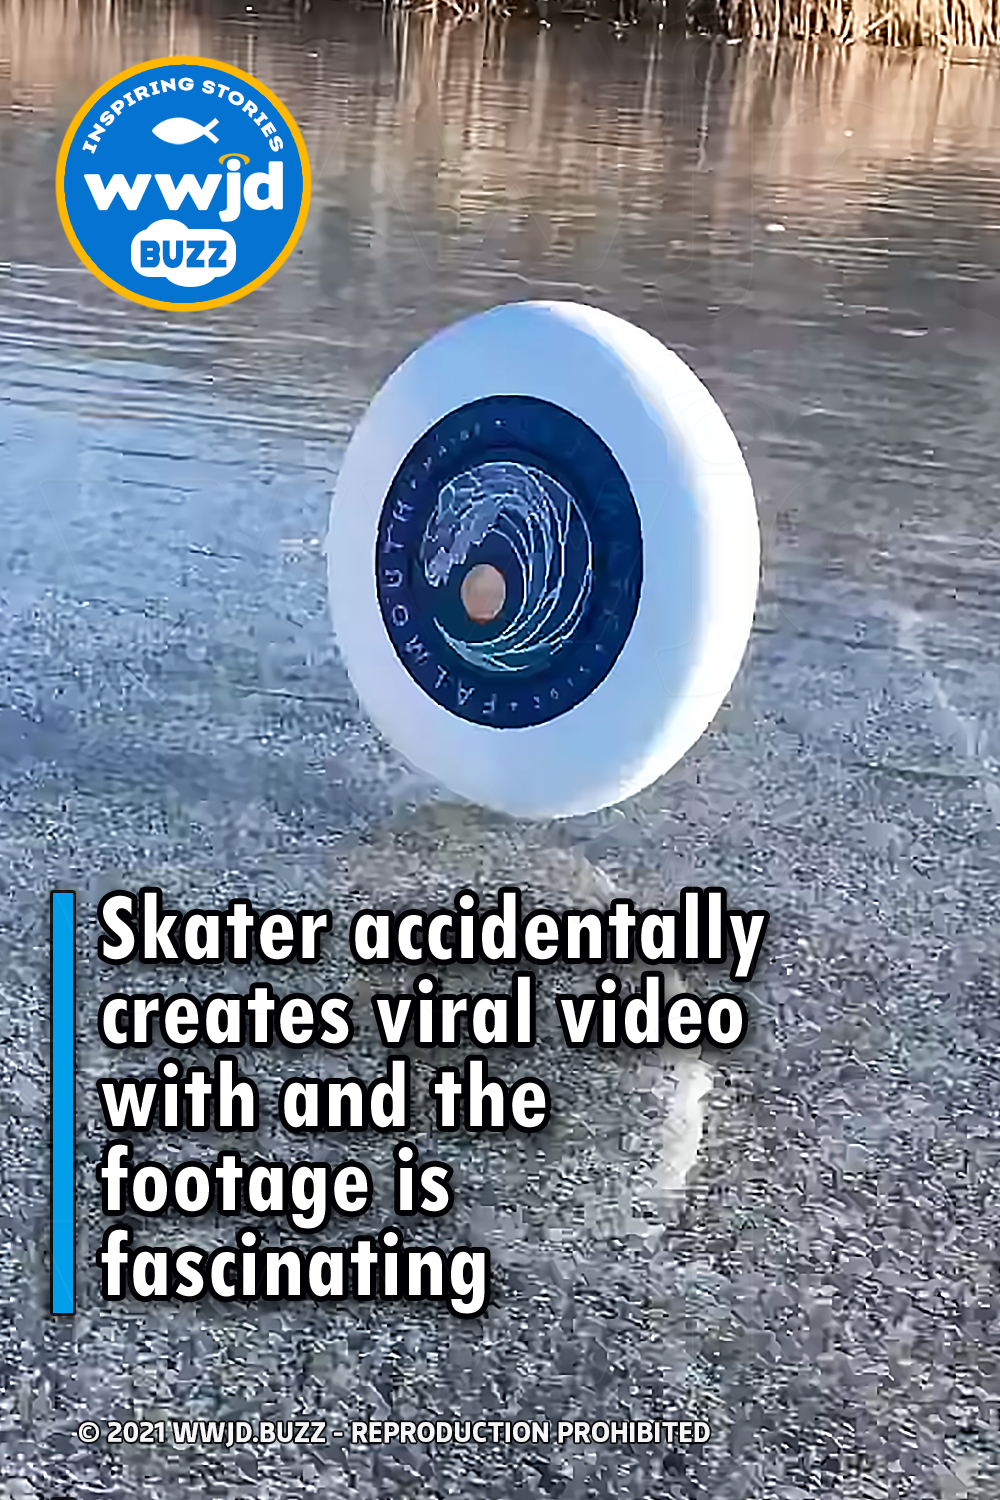 Skater accidentally creates viral video with and the footage is fascinating